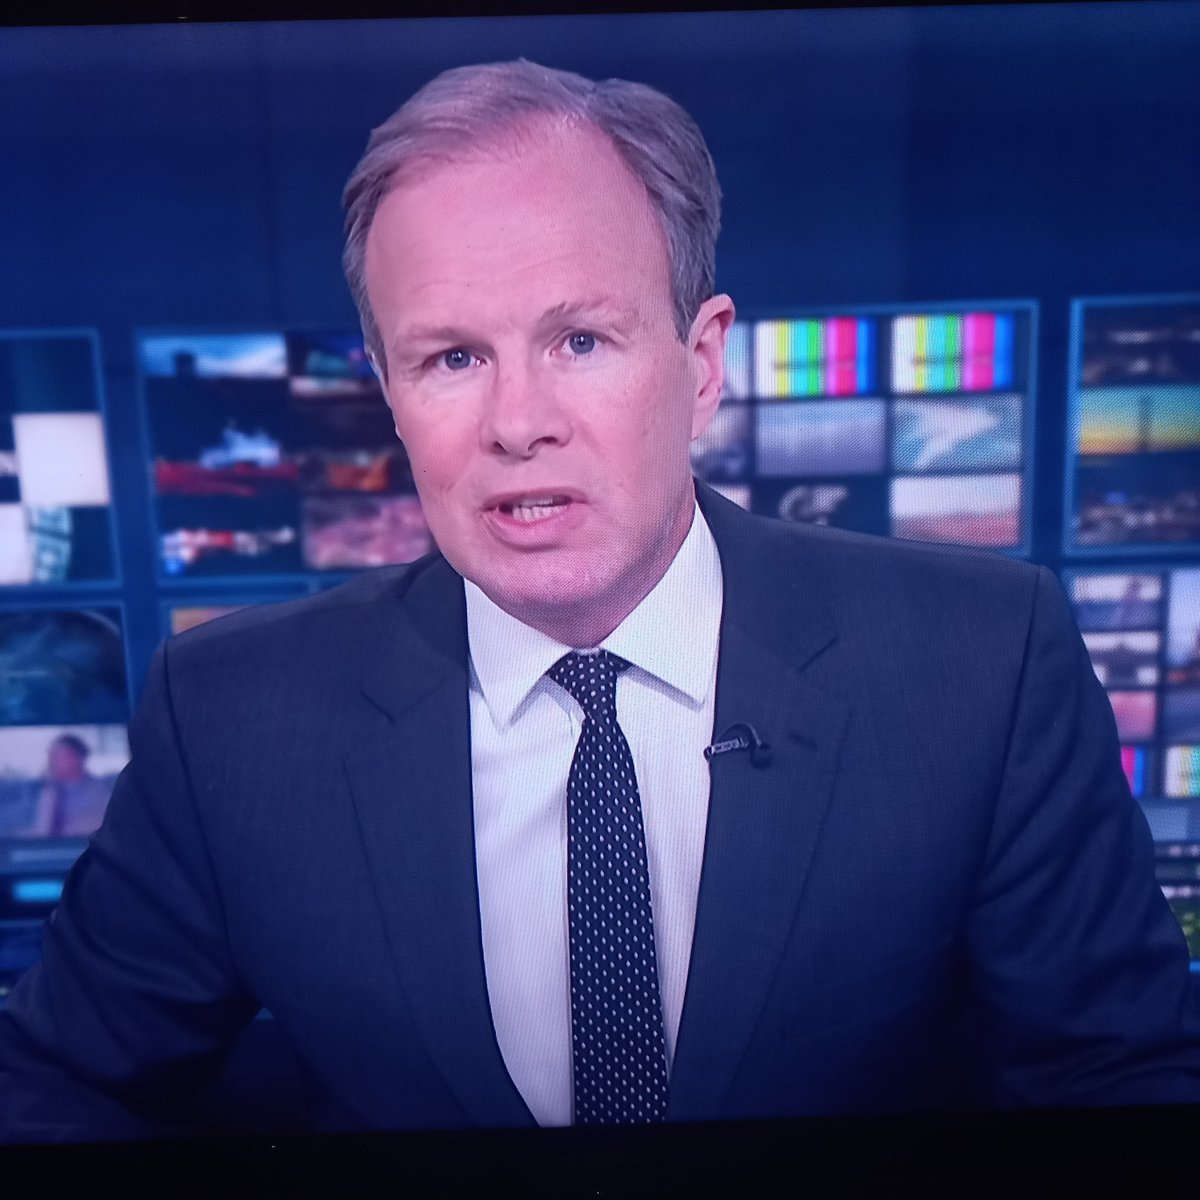 Tom Bradby absolutely eviscerating #BorisJohnson and his government over the #MartinReynolds Downing Street Party email on News at Ten right now!